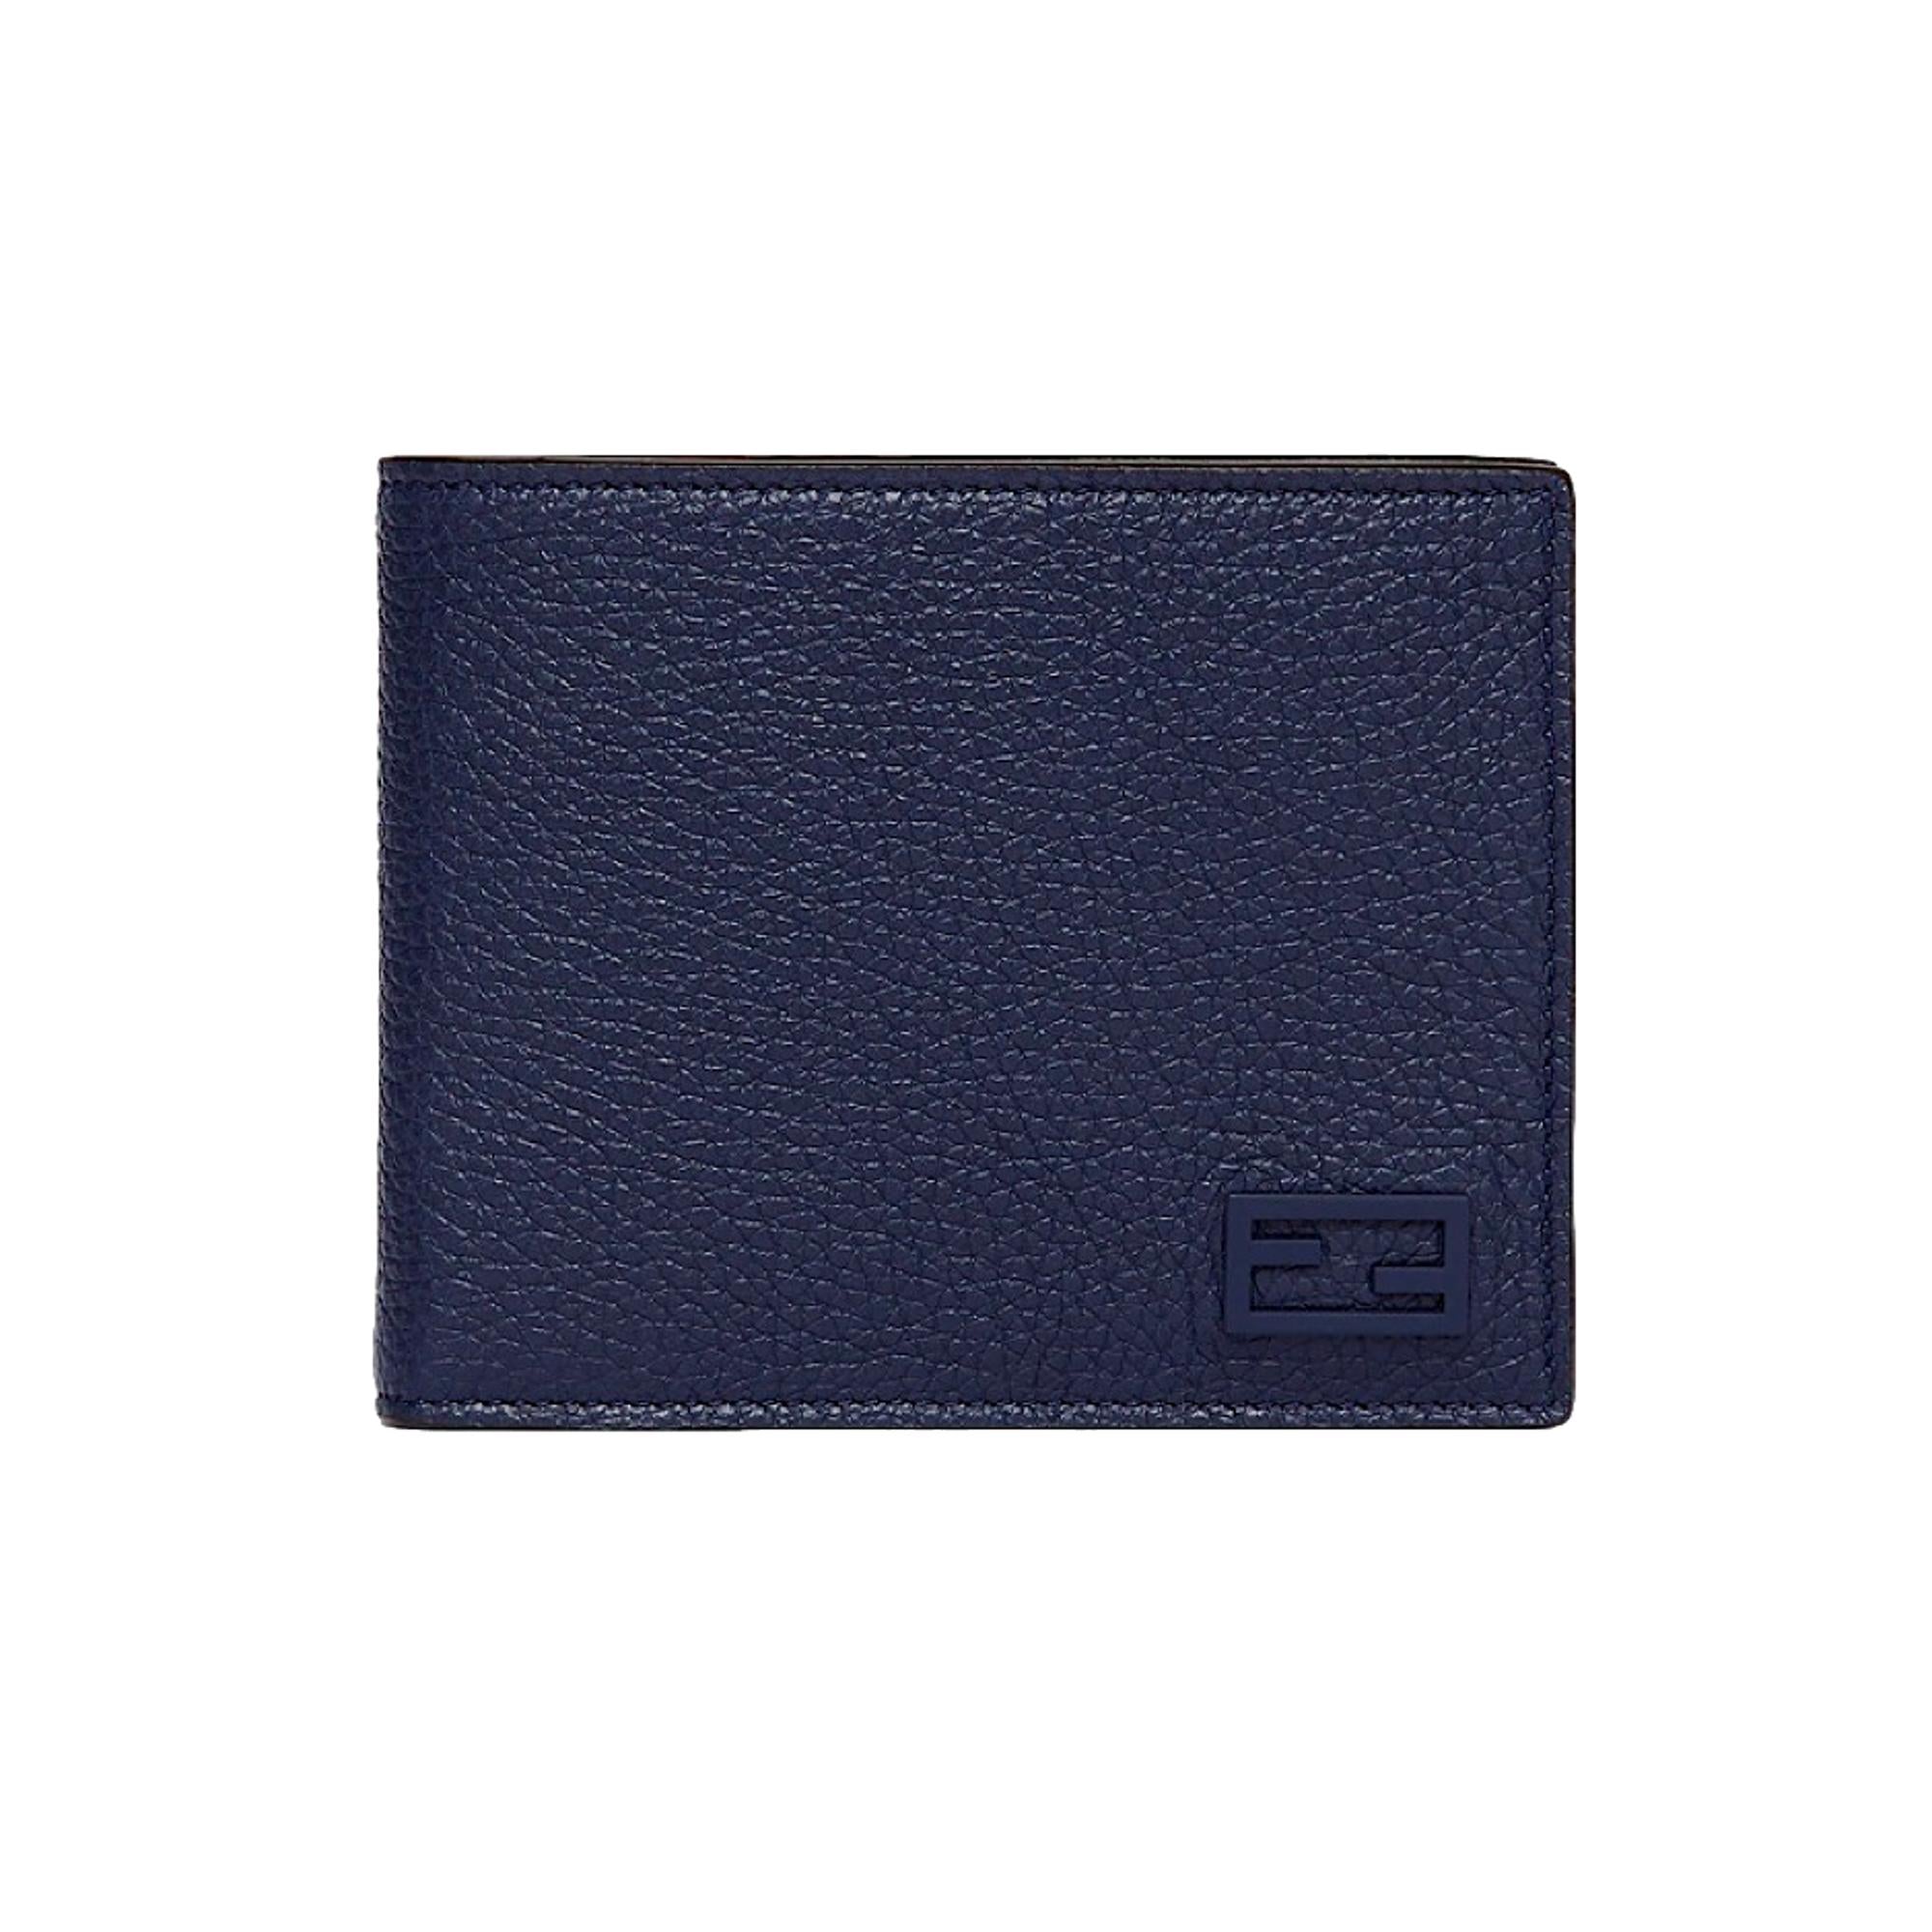 Fendi Baguette Blue Grey Pebbled Leather Billfold Wallet 7M0001 at_Queen_Bee_of_Beverly_Hills